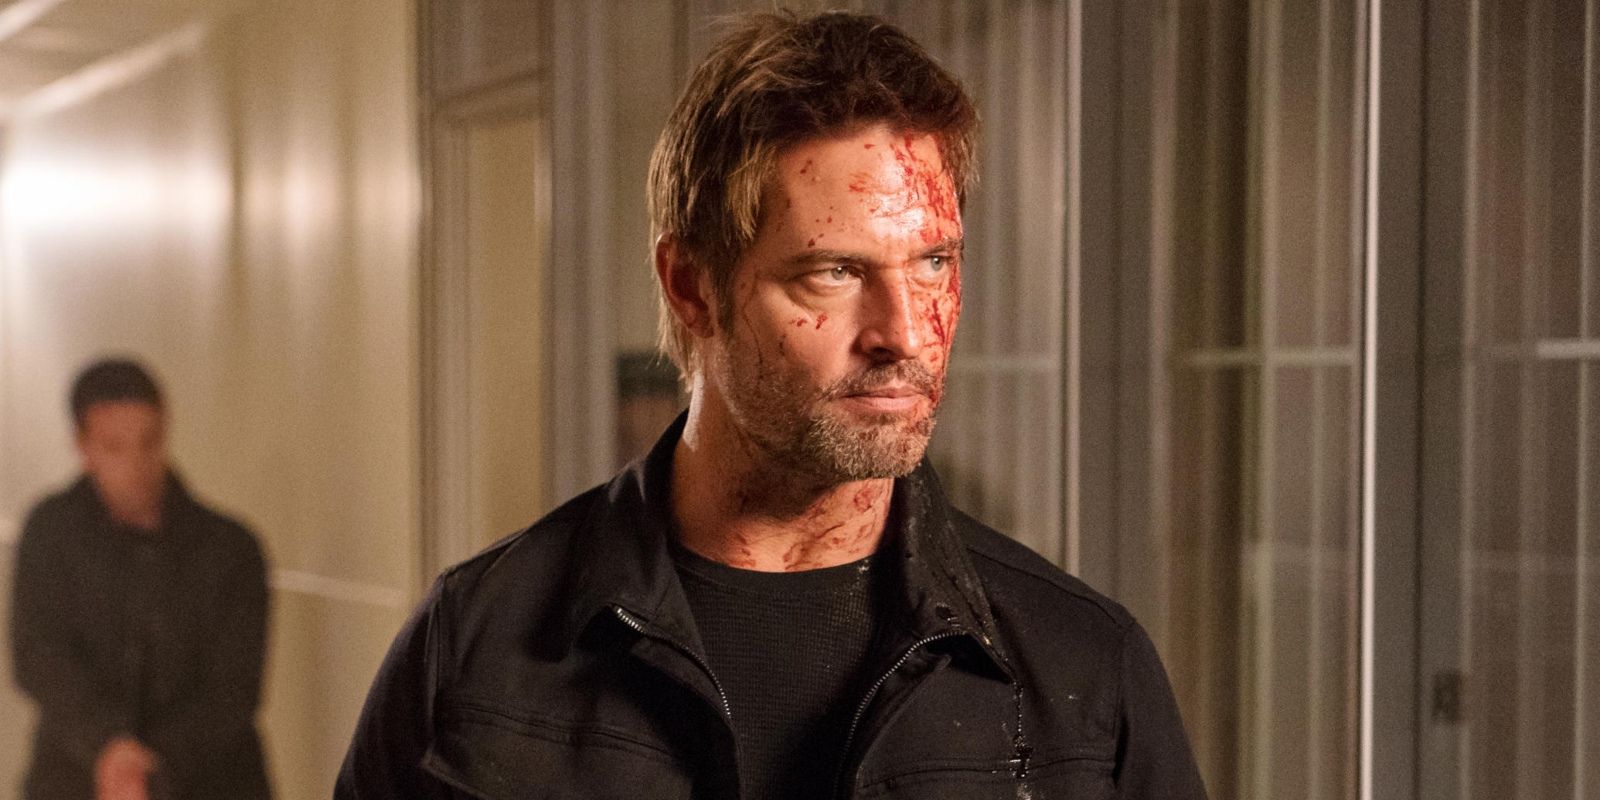 Josh Holloway as Will in Colony season 3, covered in blood and looking stern.